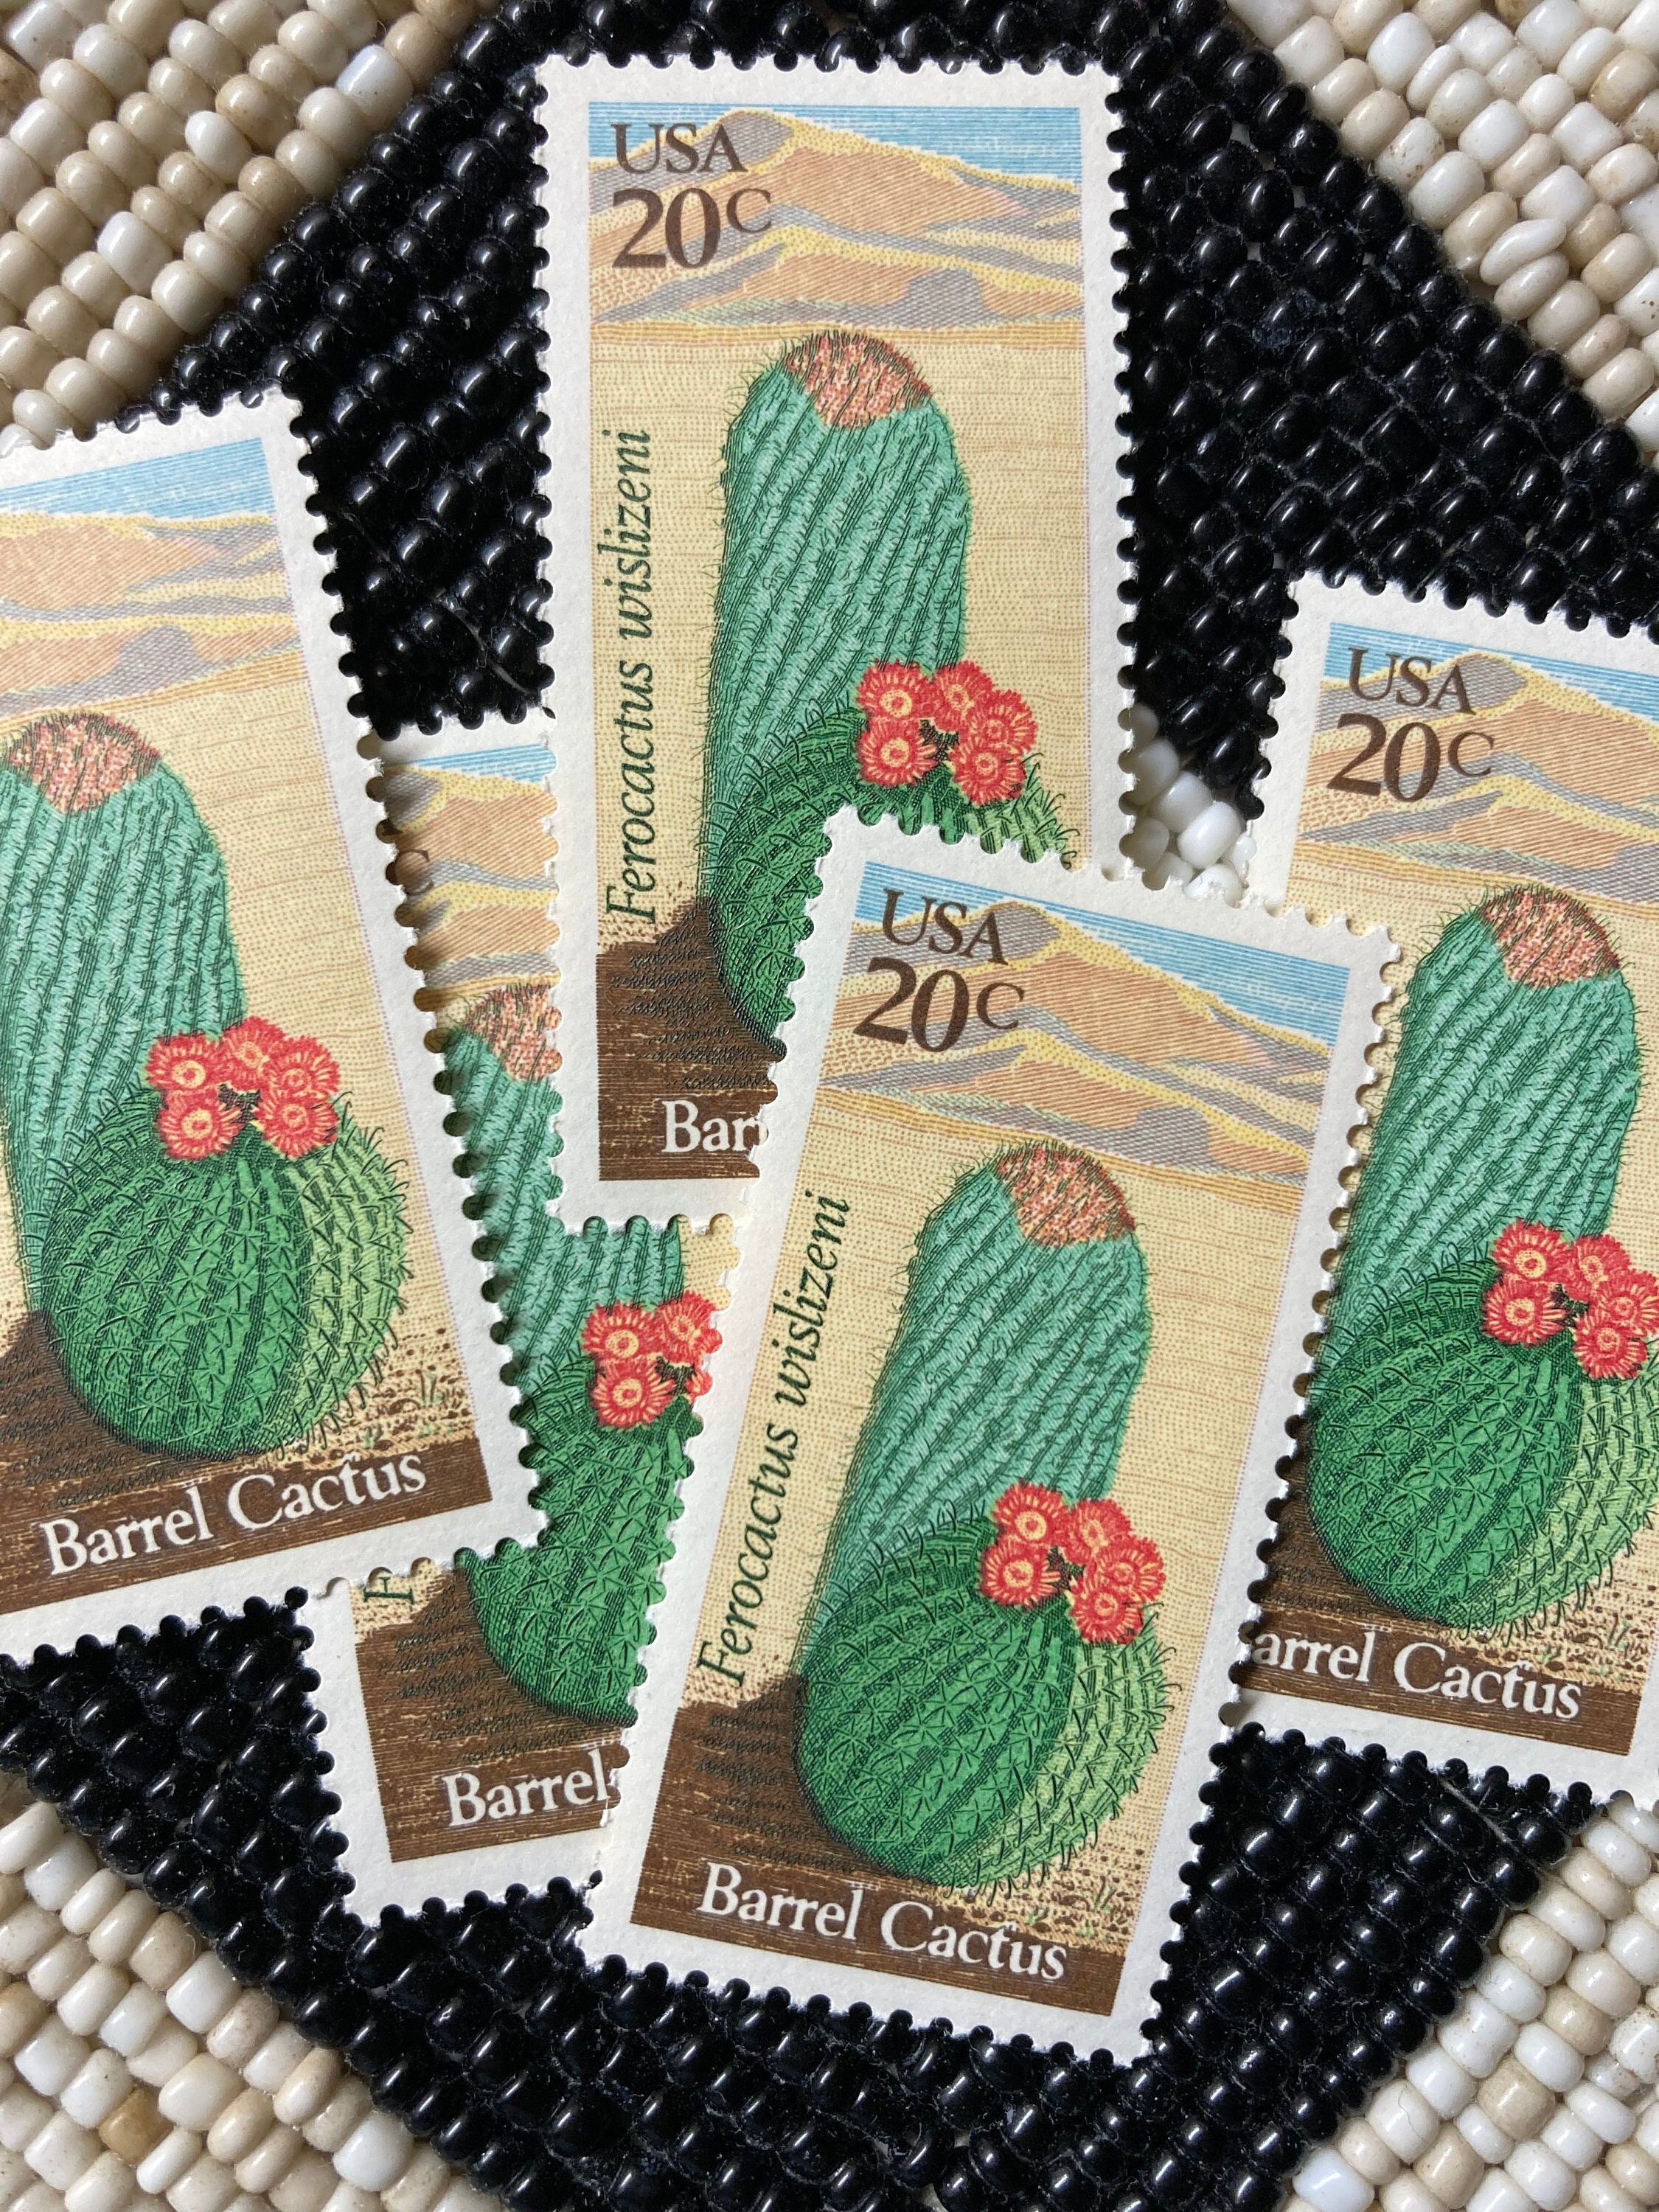 20c Cactus Plants Stamps .. Pack of 50 .. Vintage Unused US Postage Stamps  .. Southwestern Themed Stamps for Weddings and Mailing 